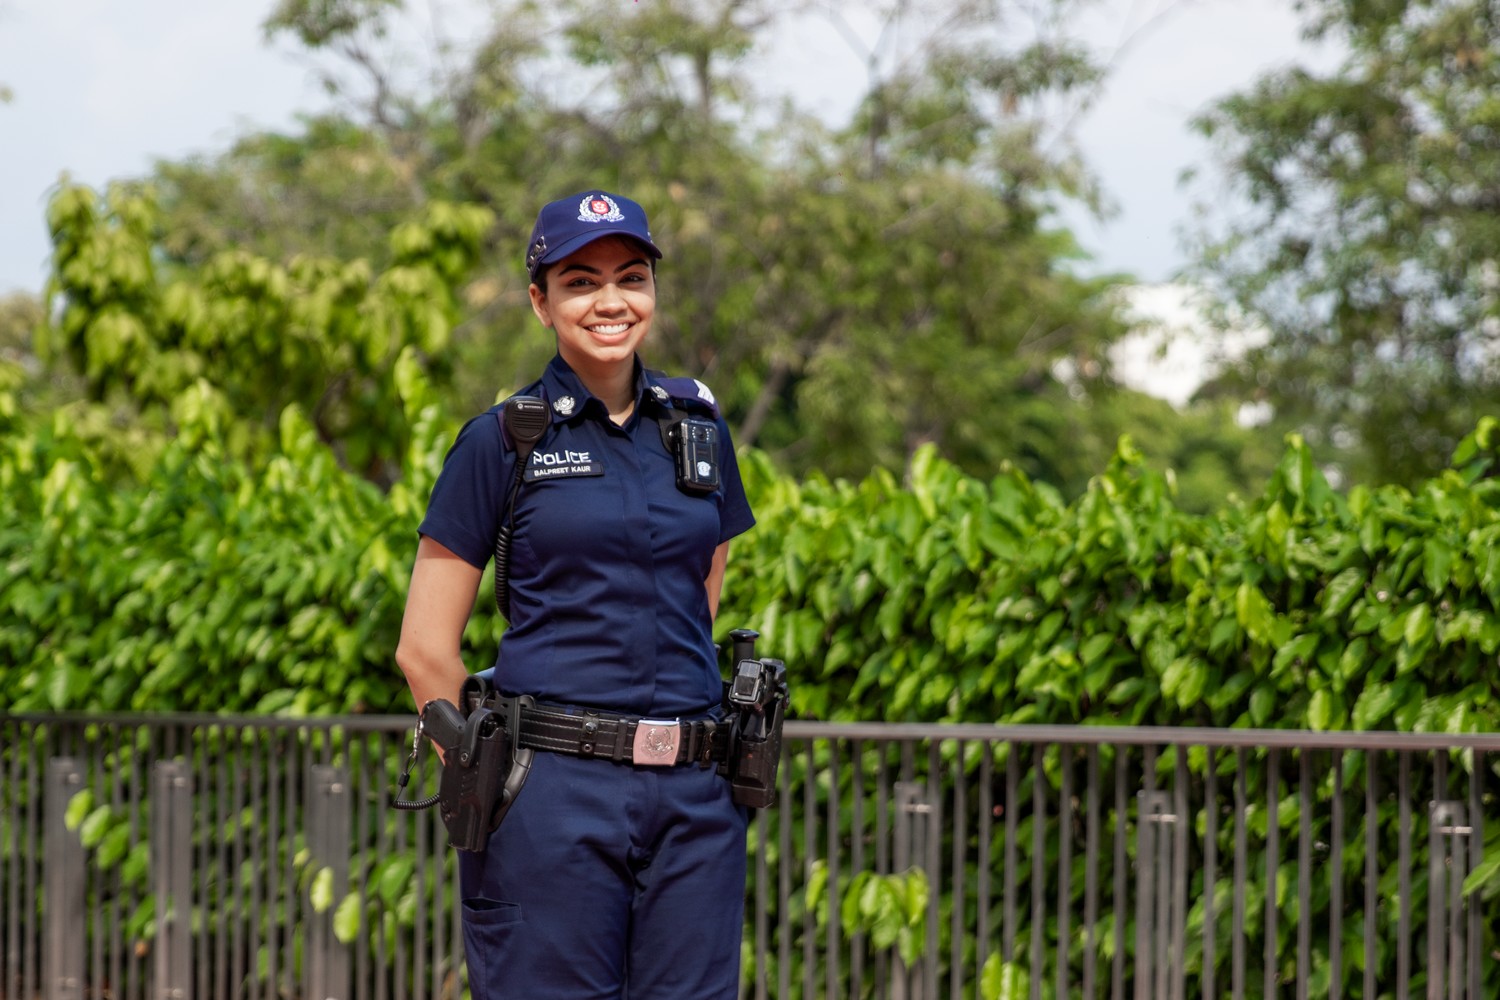 female officer in uniform standing and posing for camera. Behind her is a railing with the canopy of trees sticking out